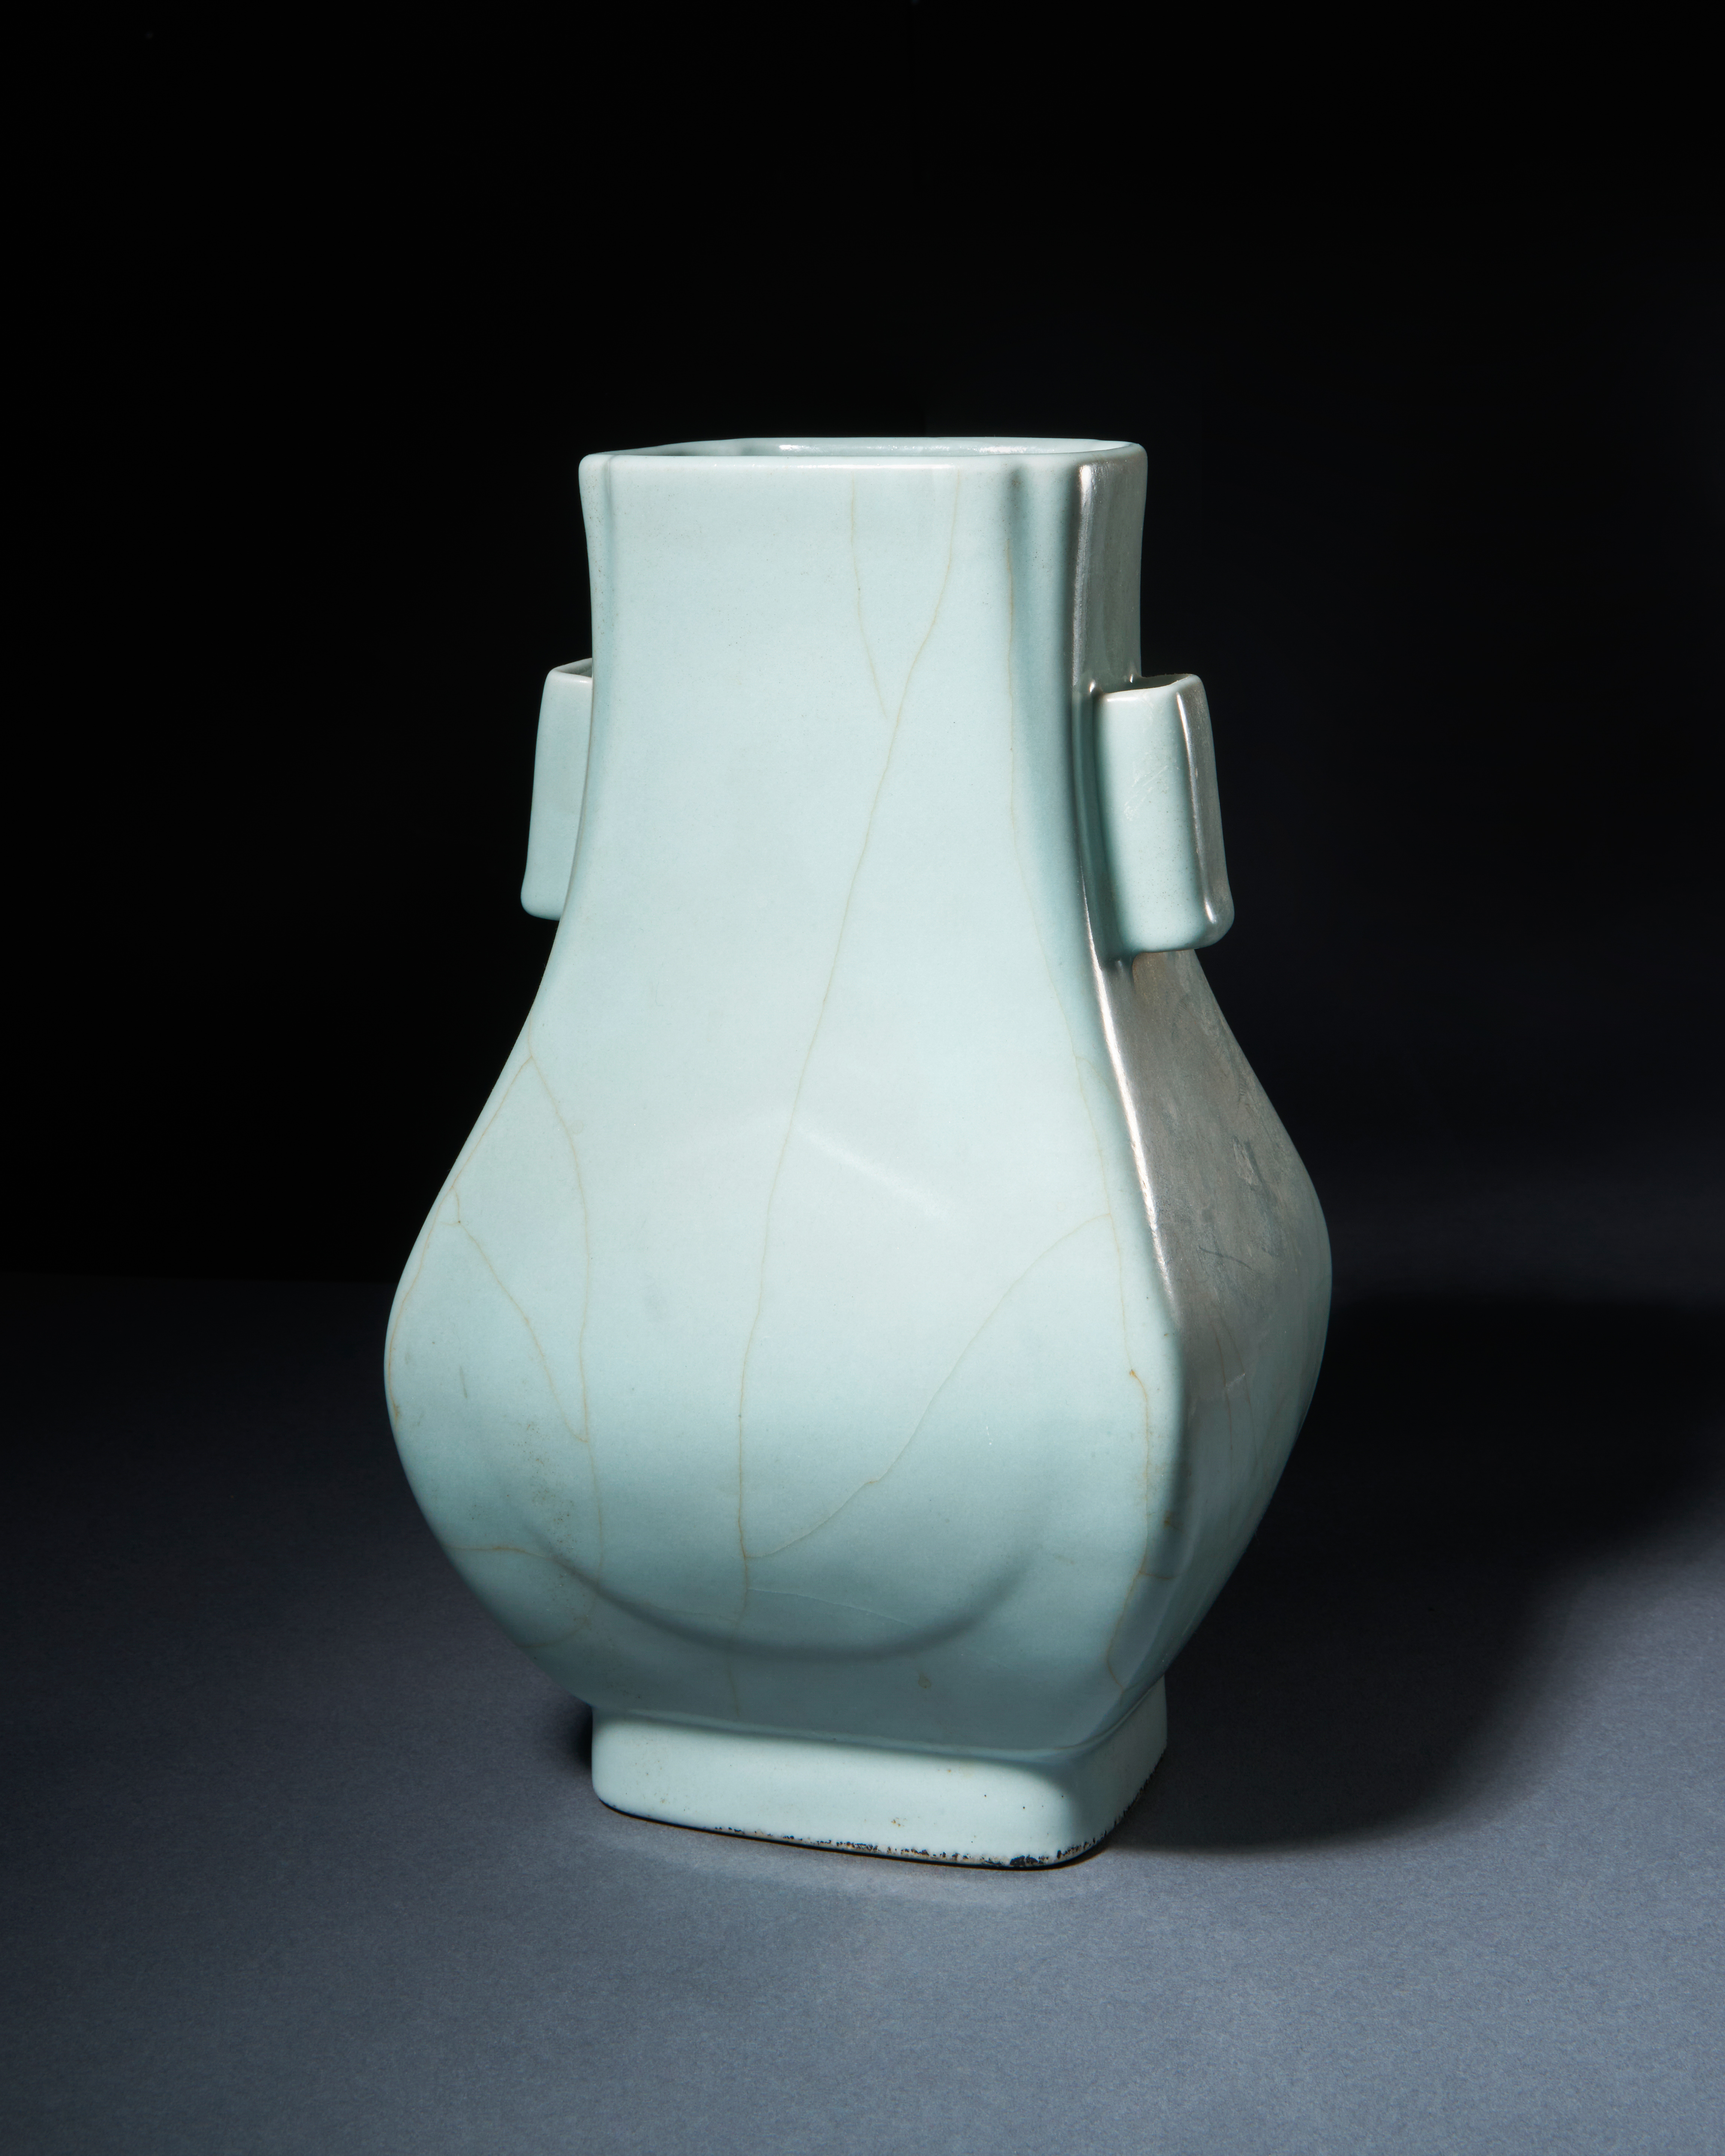 A GUAN-TYPE HU-FORM VASE GUANGXU SIX-CHARACTER MARK IN UNDERGLAZE BLUE AND OF THE PERIOD (1875-1908) - Image 2 of 4